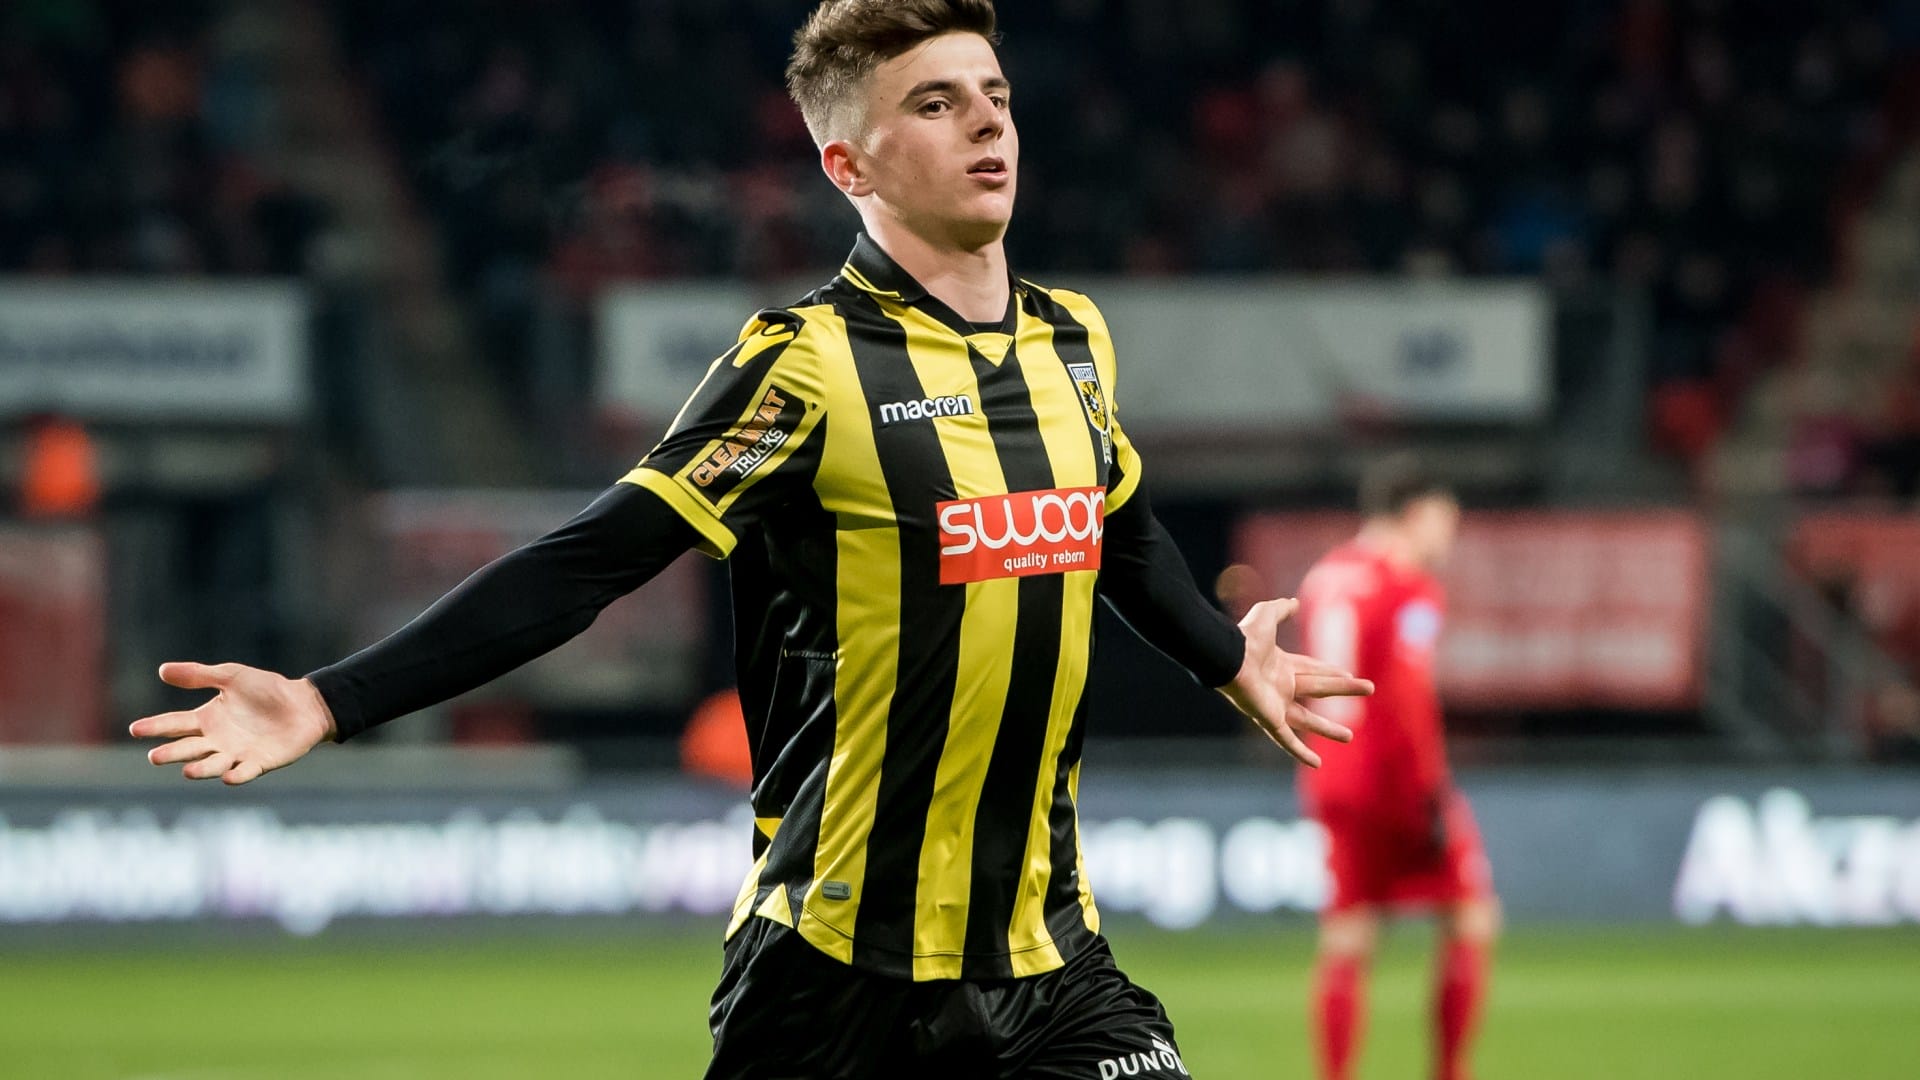 Mason Mount’s former club relegated after being slapped with 18-POINT deduction and fined for major rule breach